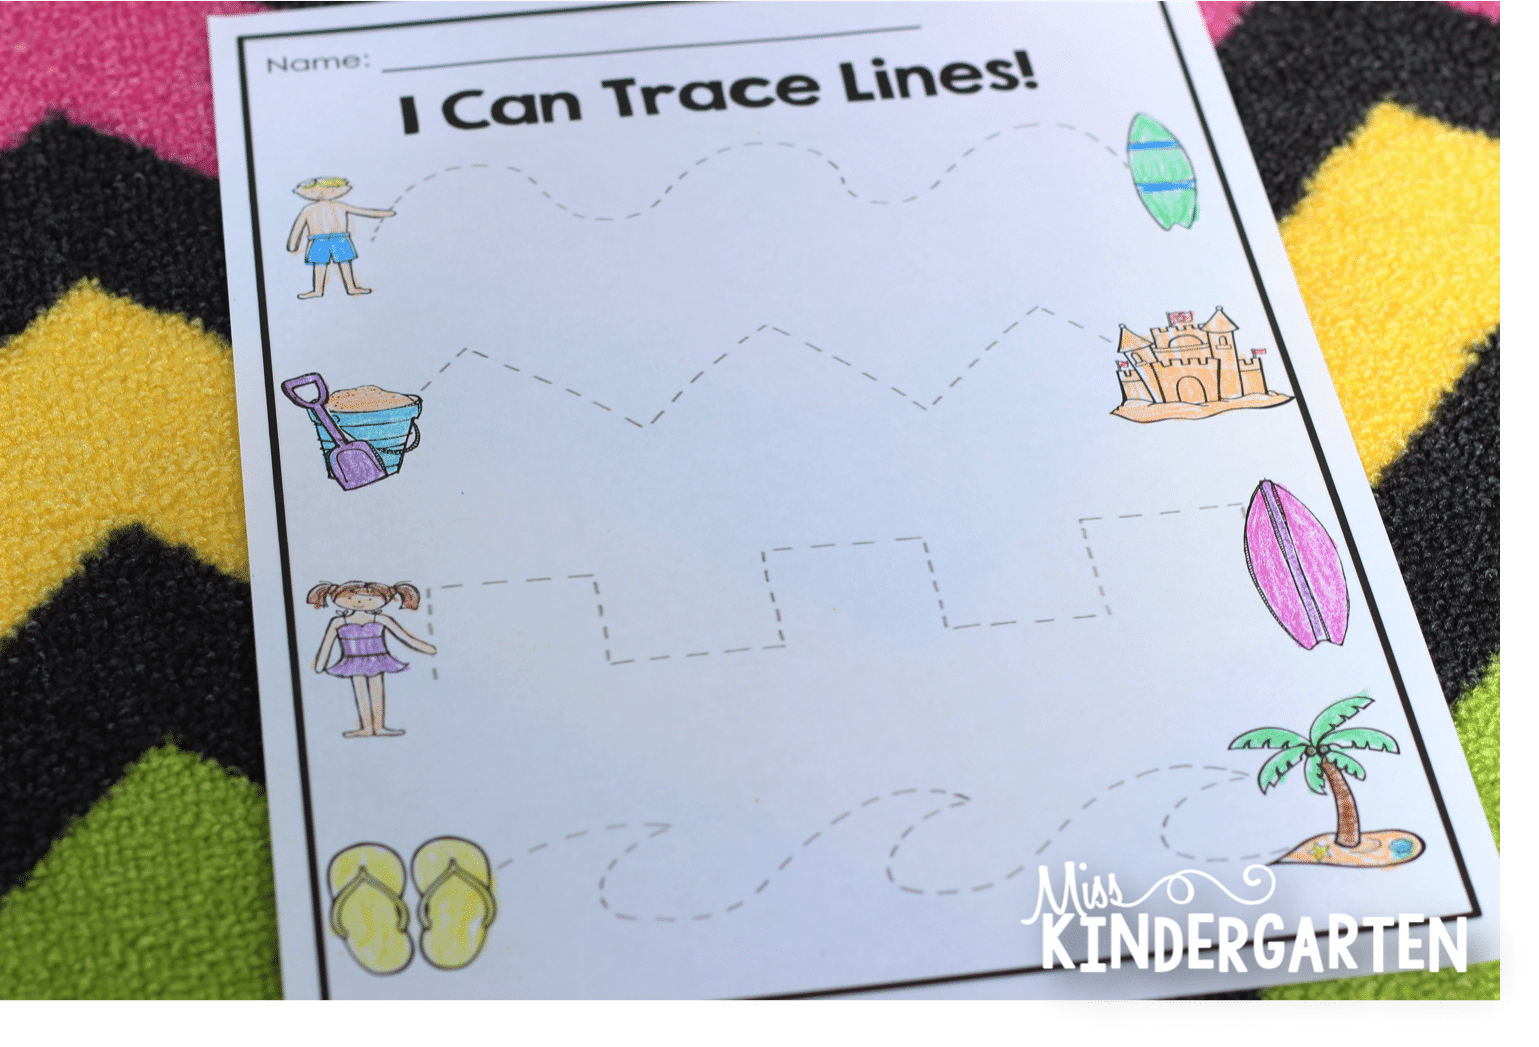 I Can Trace Lines! worksheet with a summer theme.